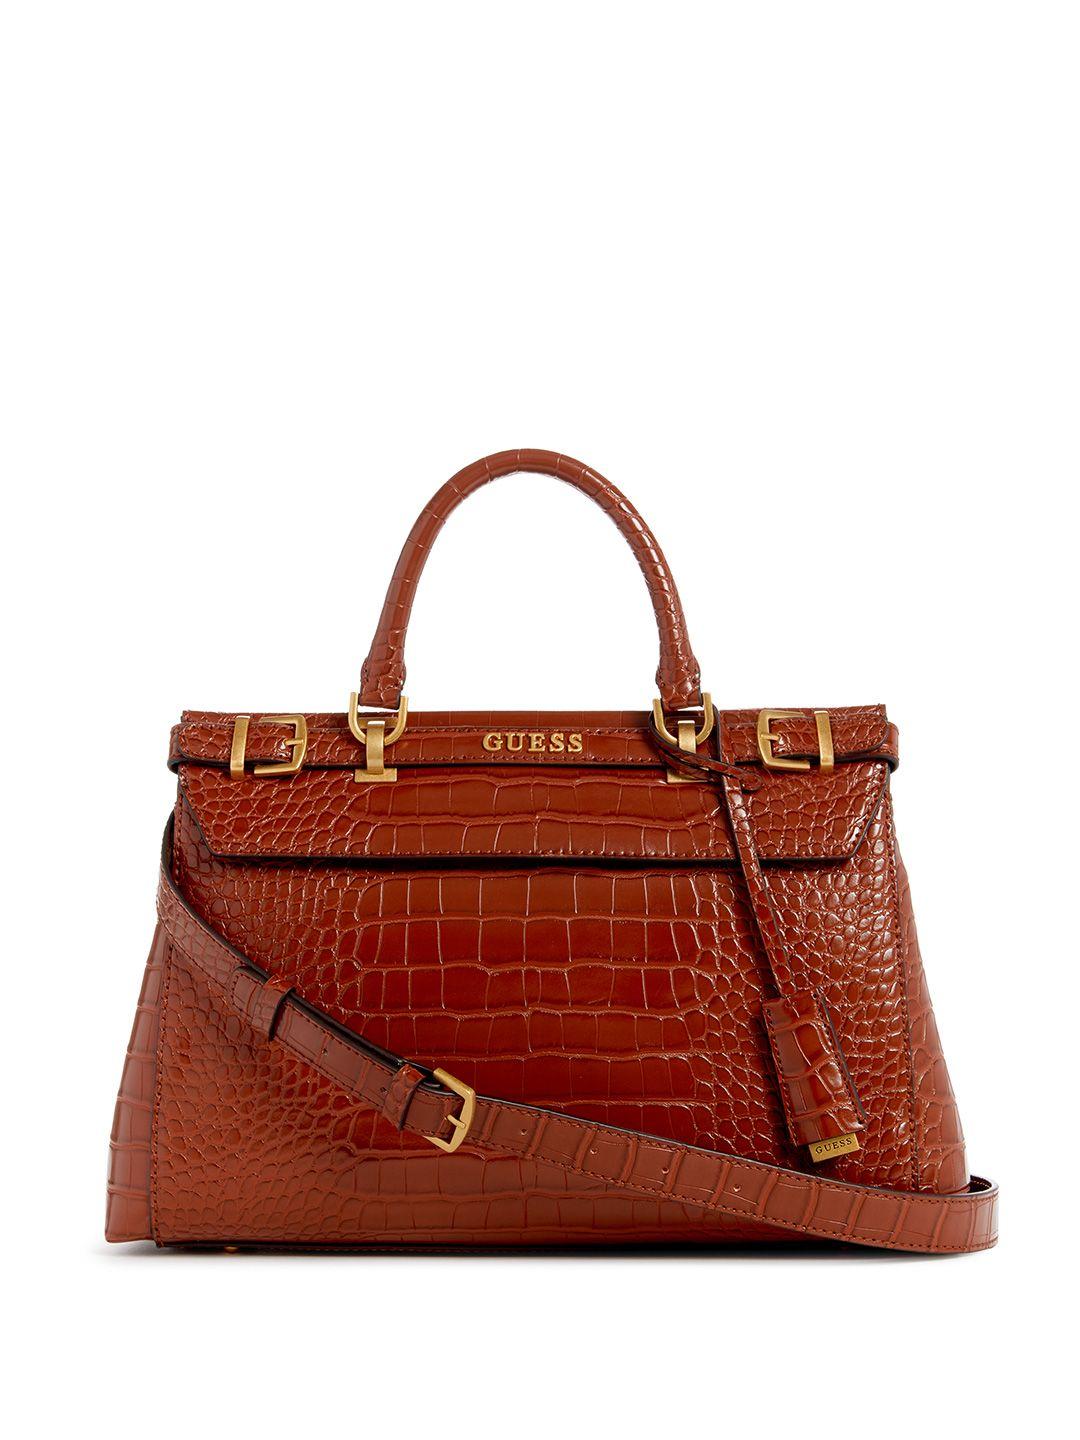 guess croc textured structured handheld bag